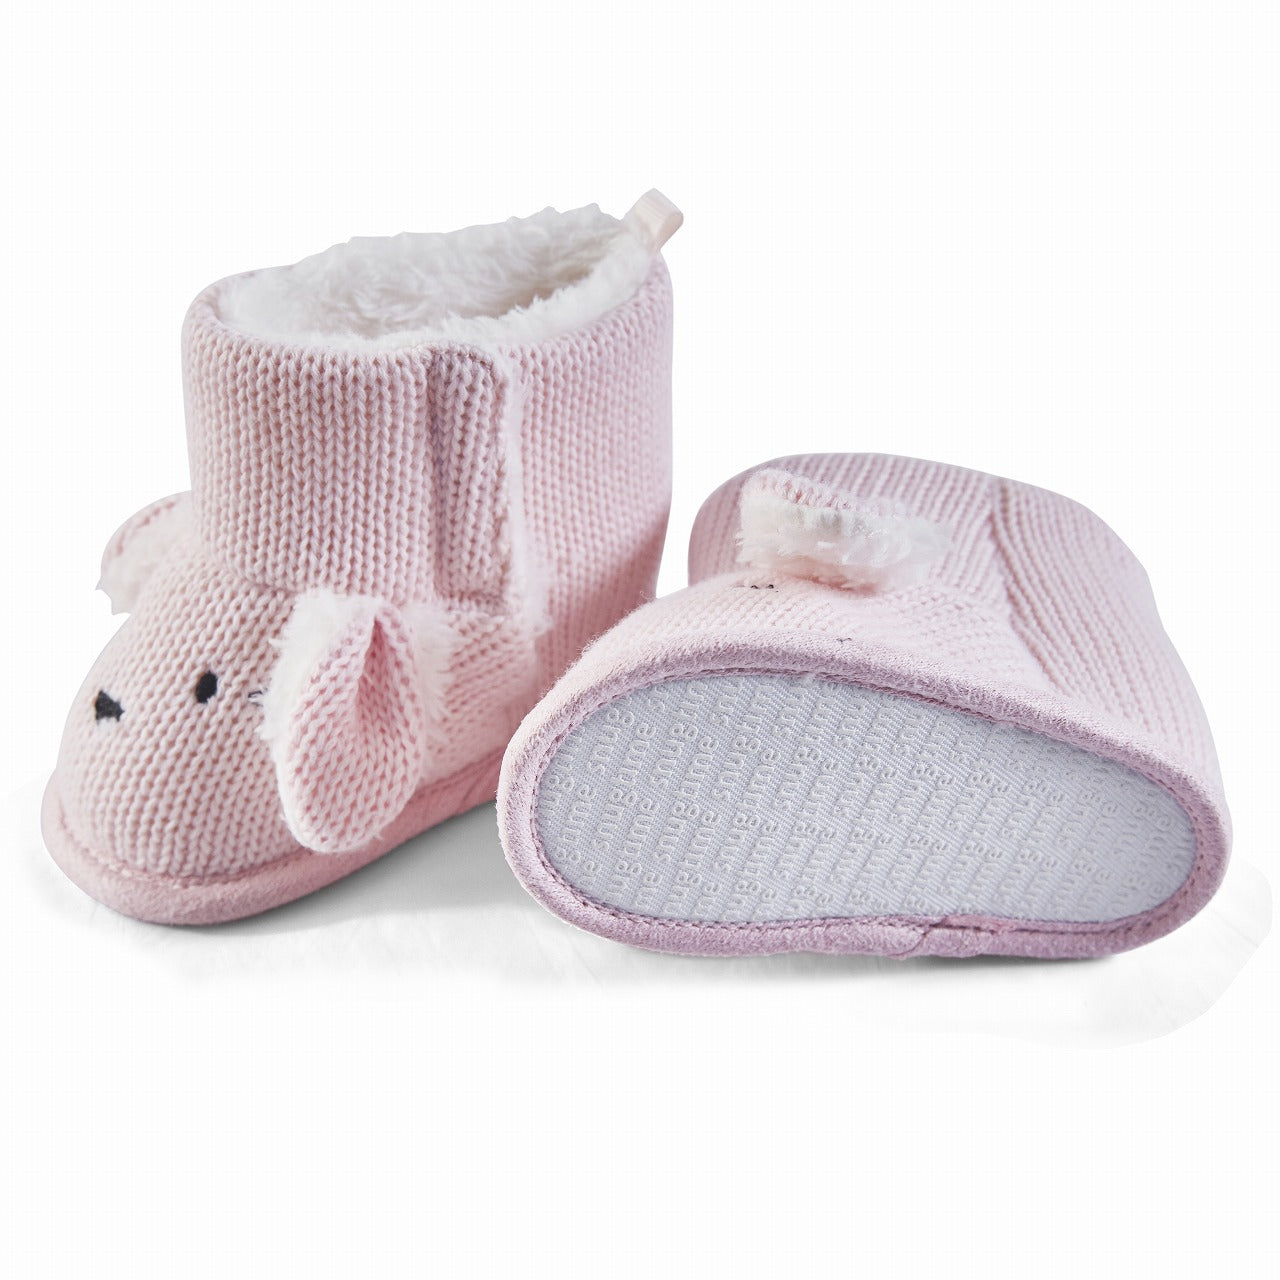 Snugtime Knitted Bunny Boot - Pink